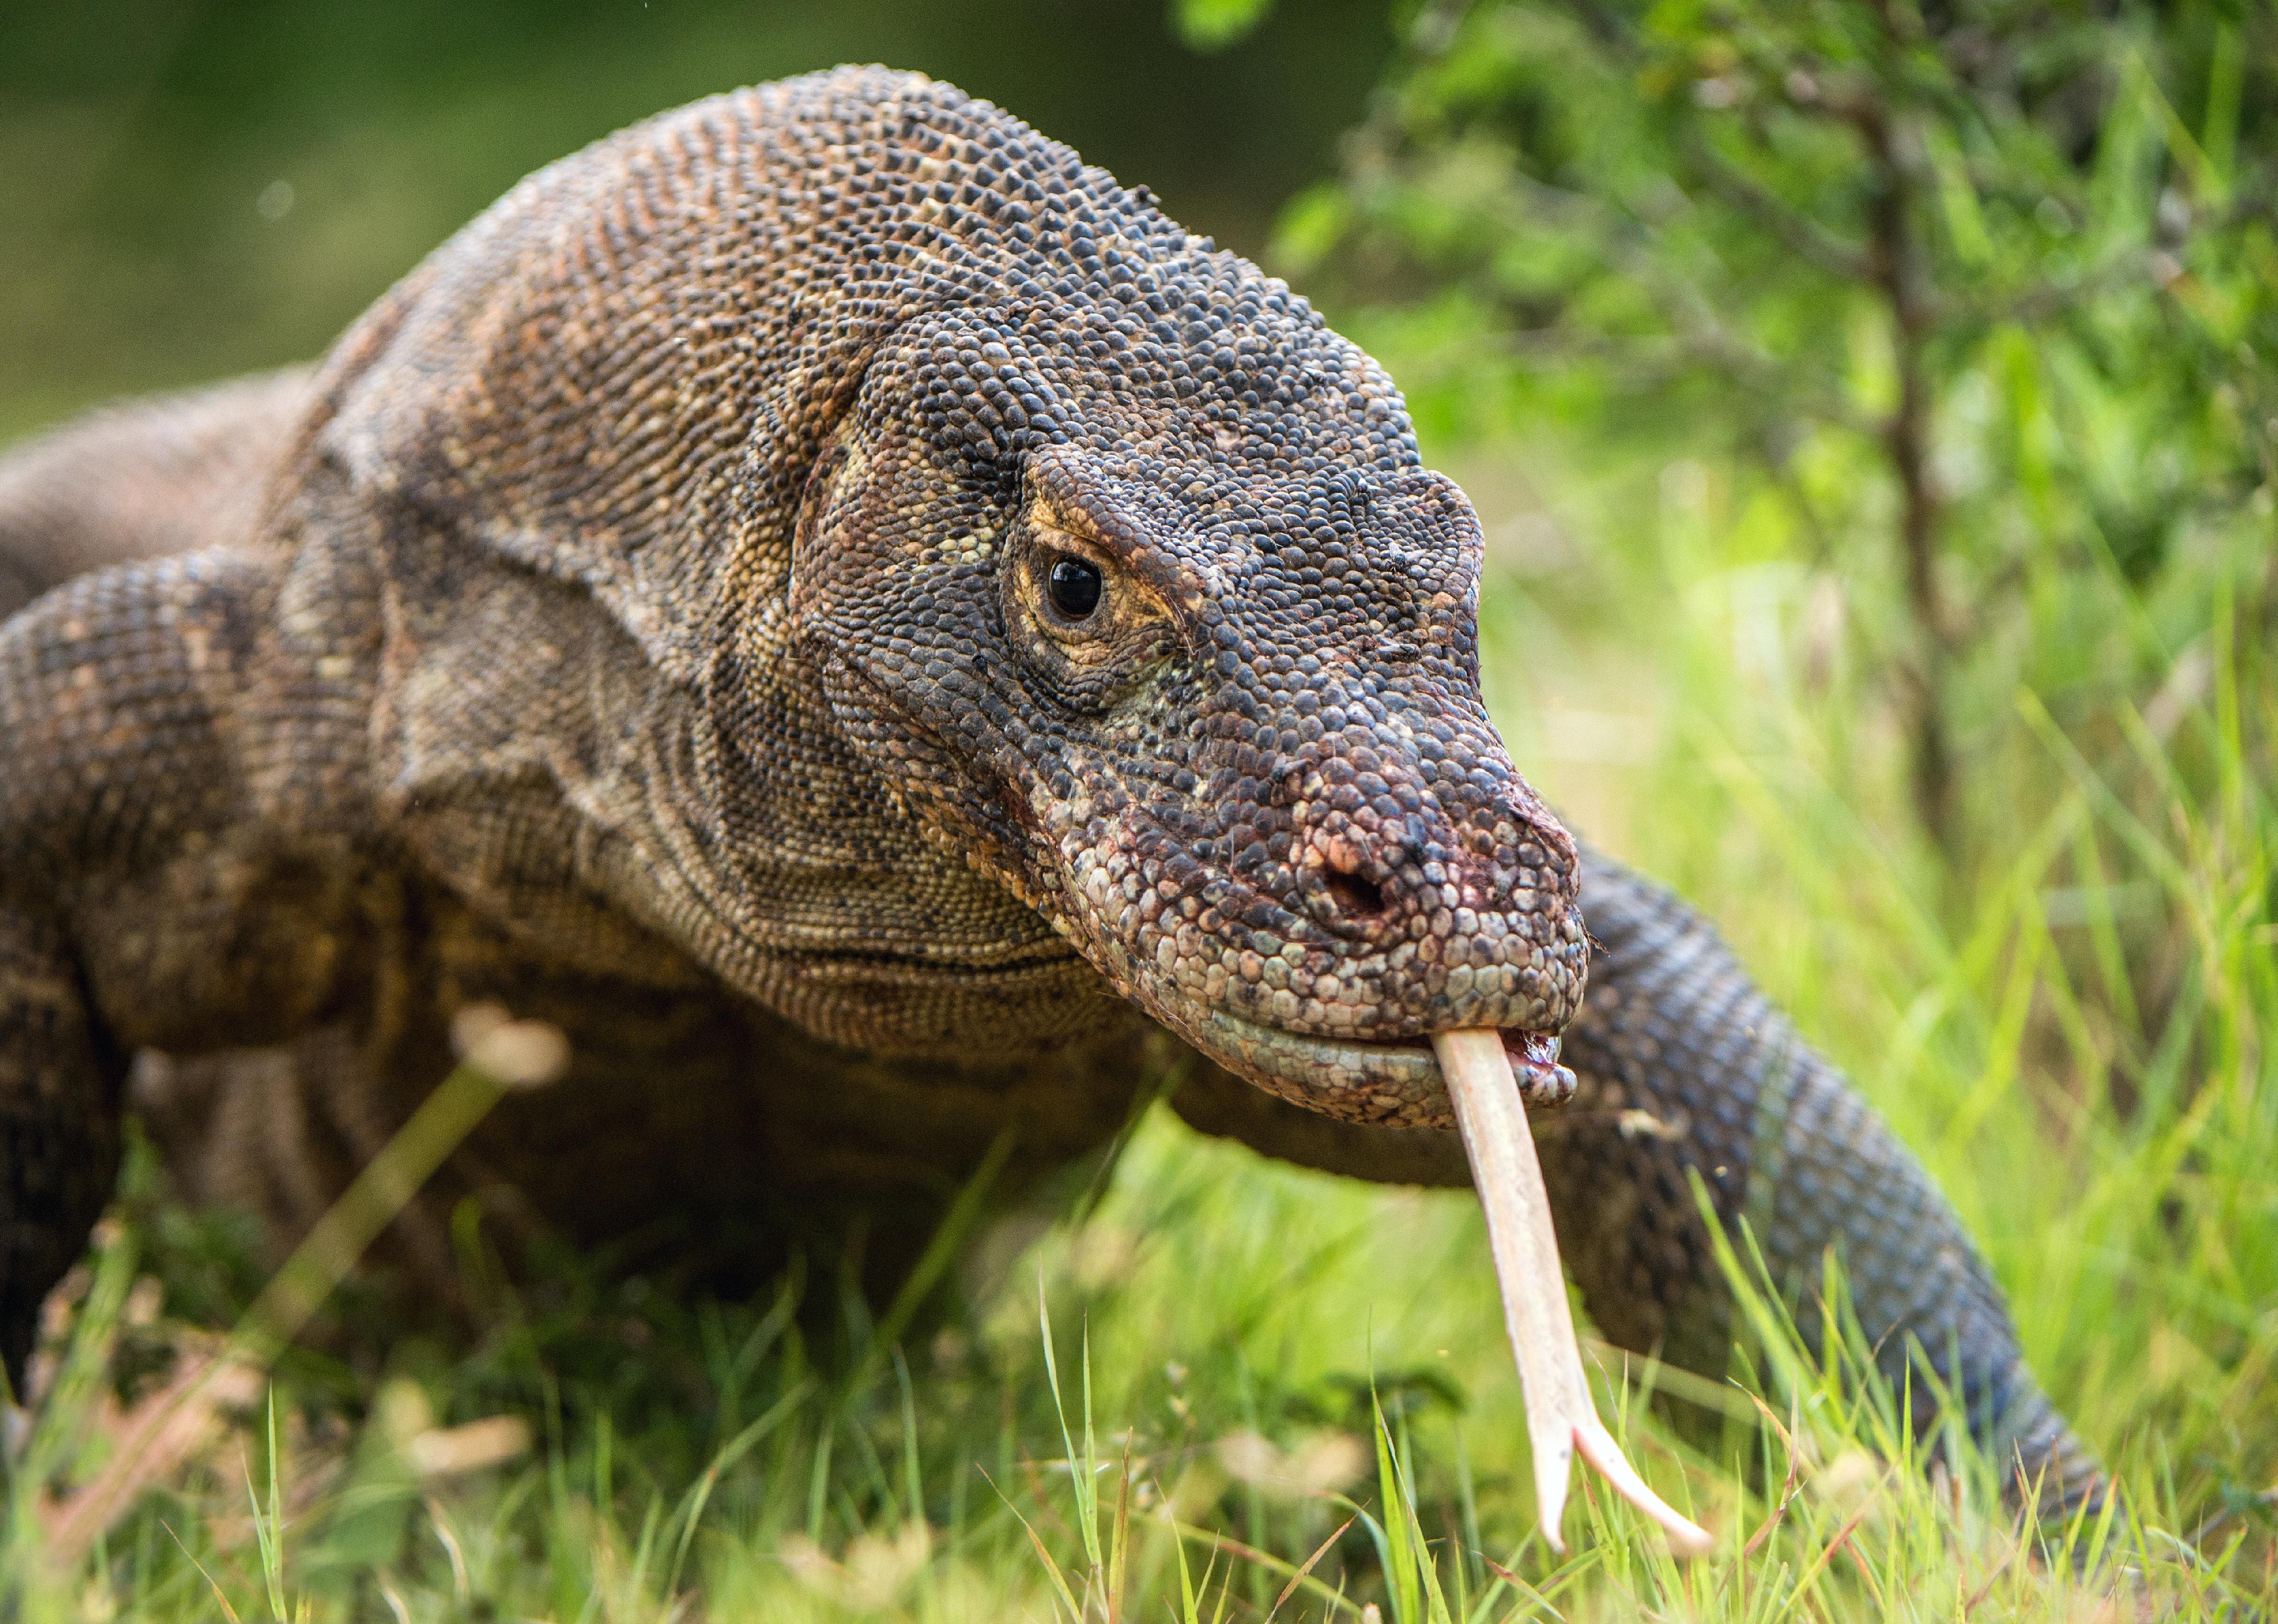 Komodo dragon with the forked tongue sniffs air.